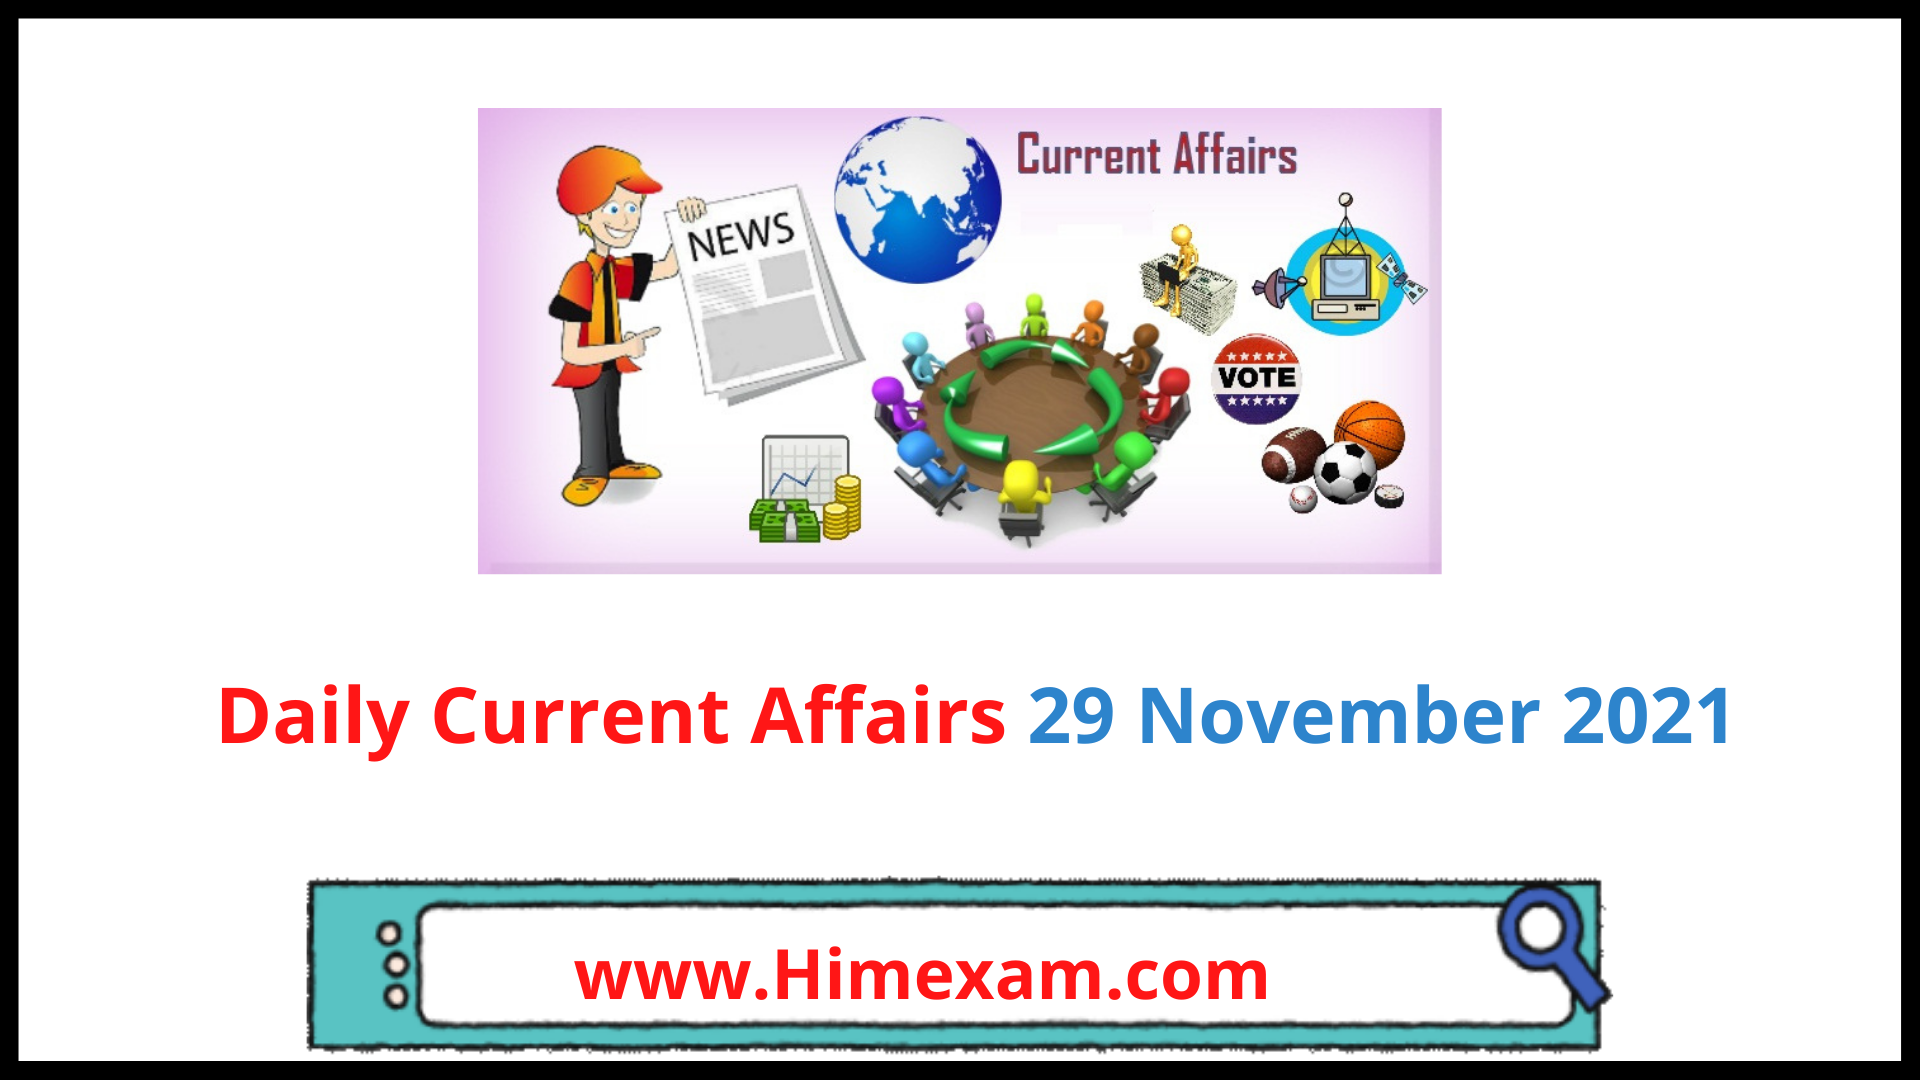 Daily Current Affairs 29 November 2021